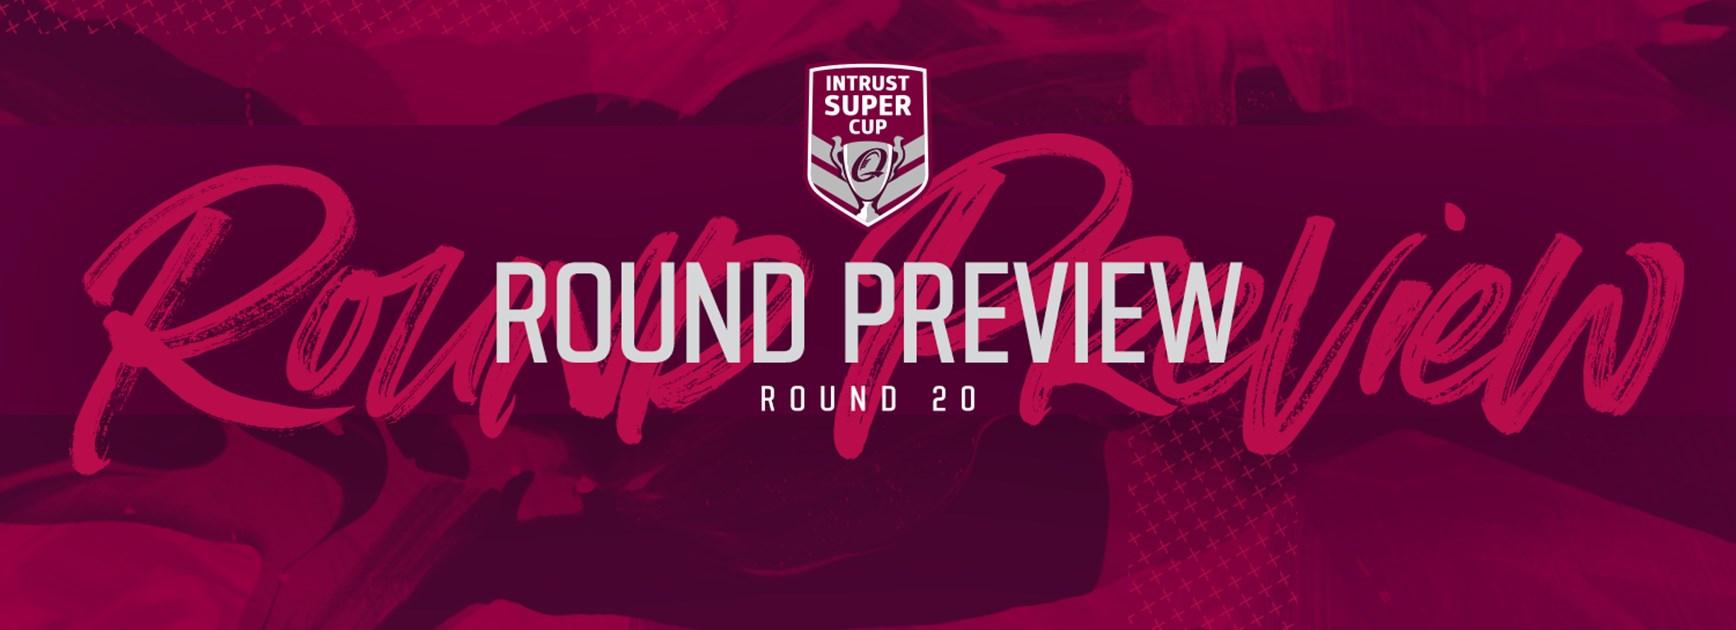 Intrust Super Cup Round 20 preview